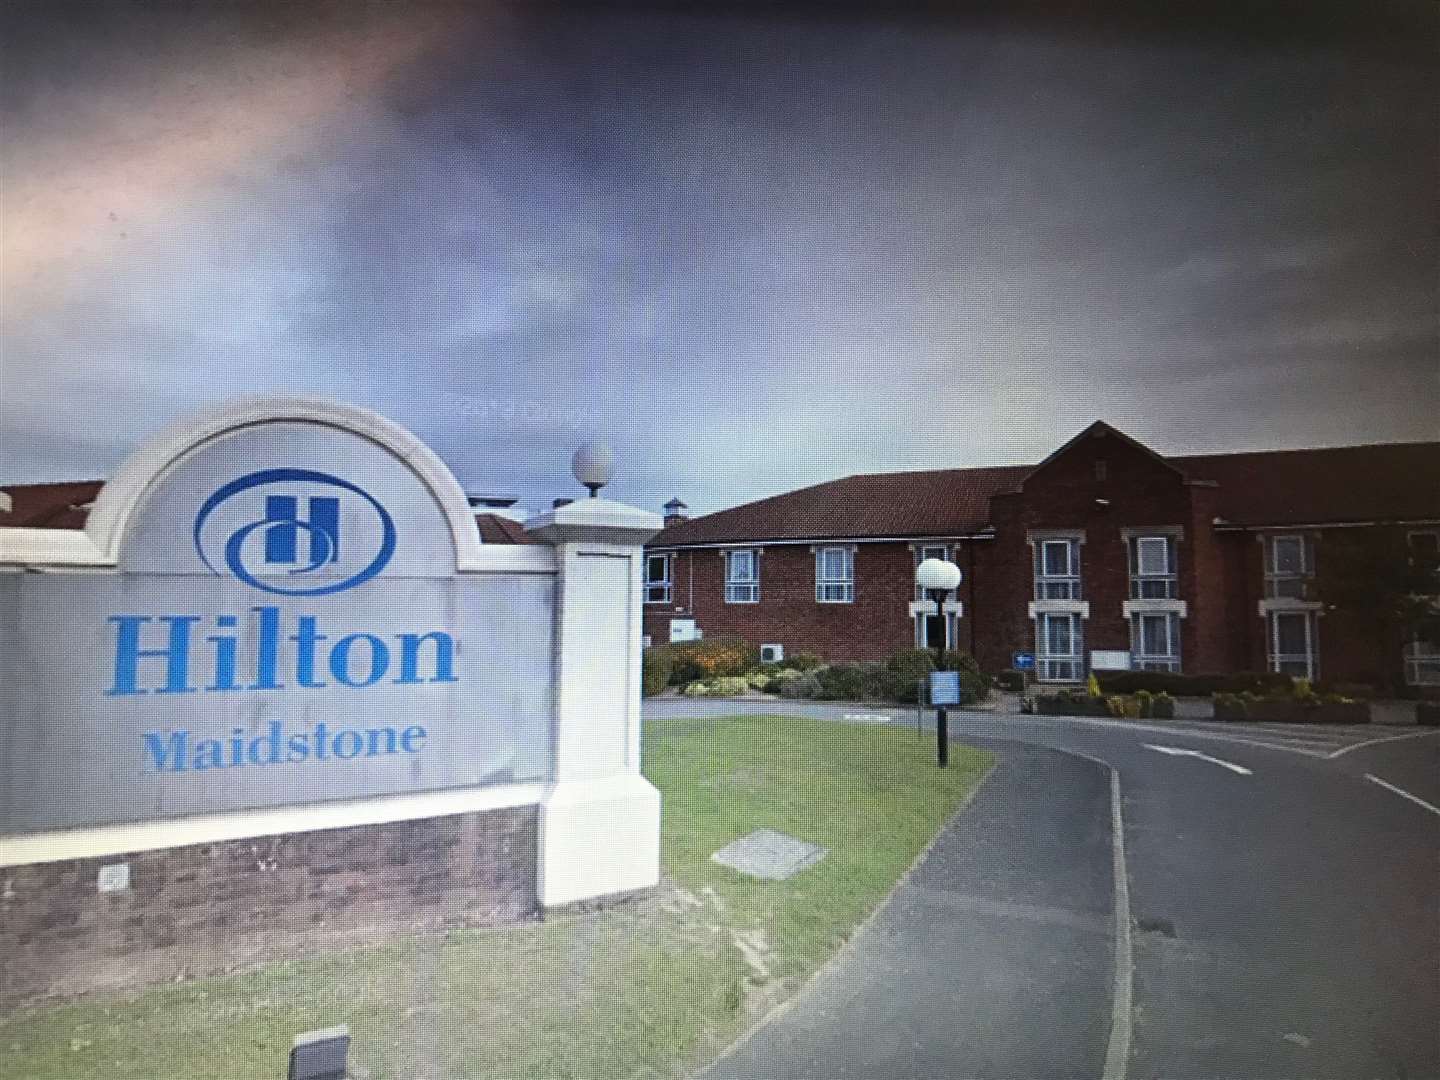 The Hilton in Maidstone has come under fire from Viking metal band Amon Amarth's bassist